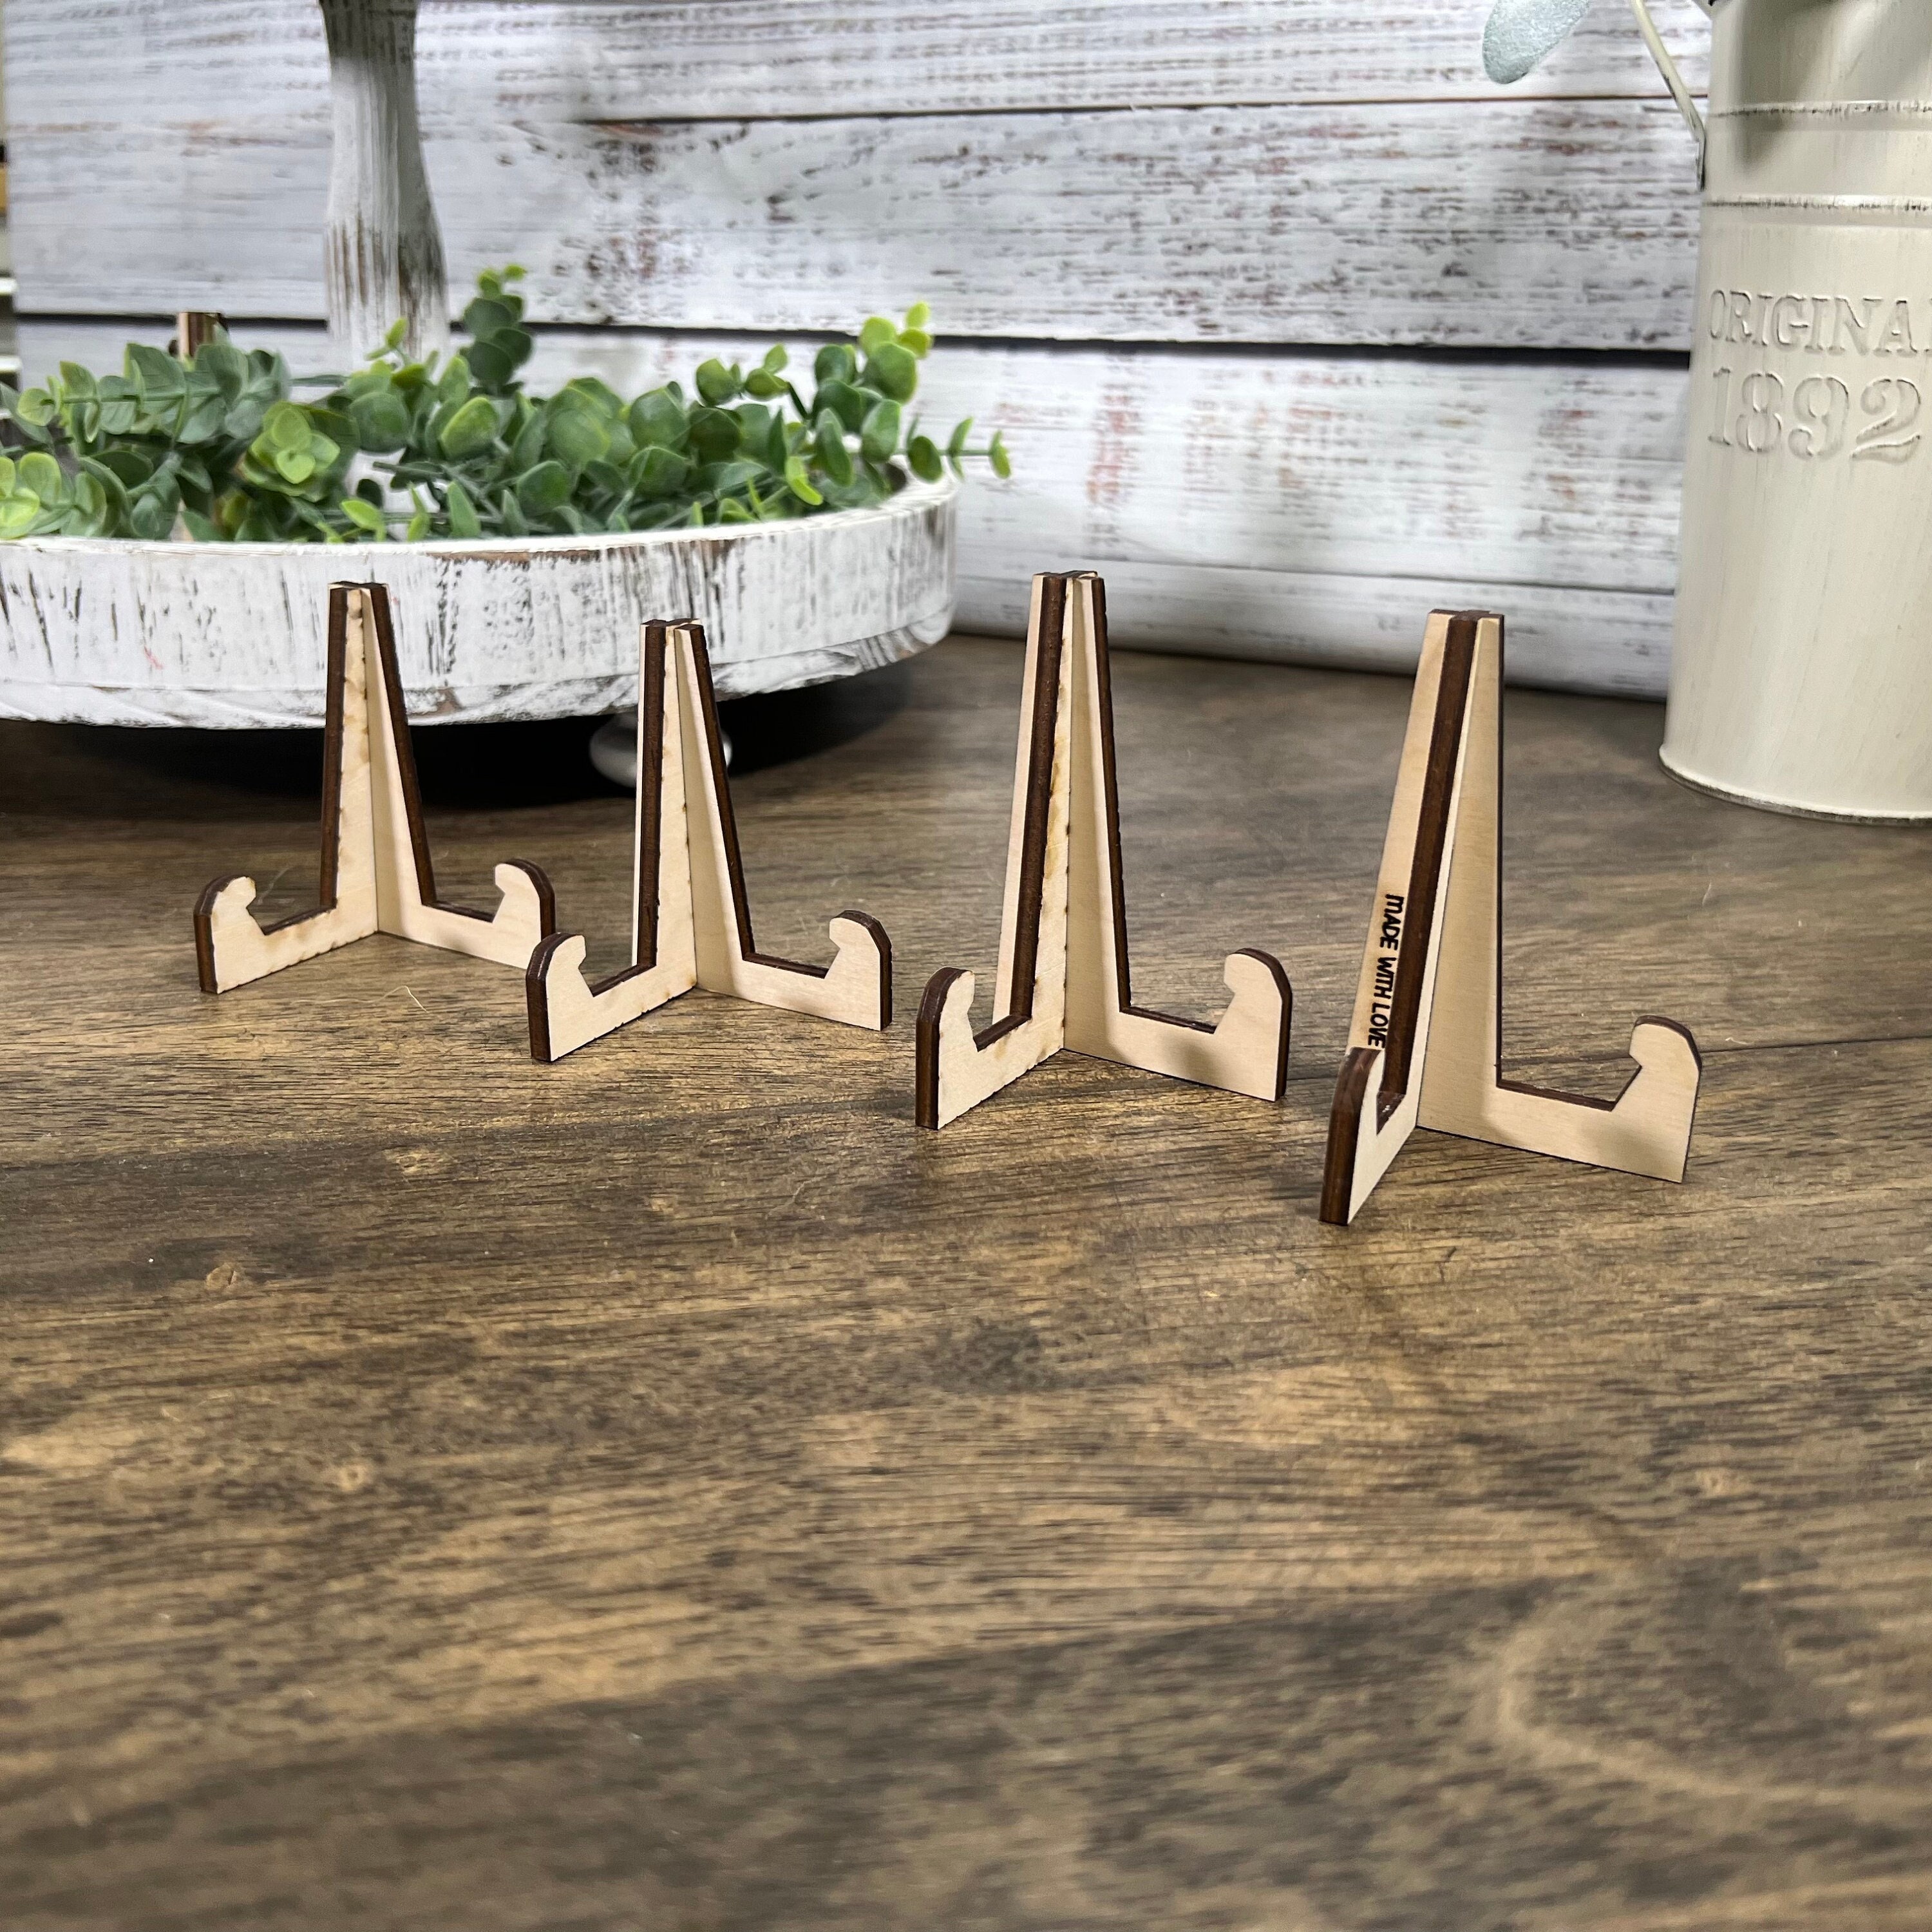 Mini Easel Stand. Mini Wooden Artist Easel. Mini Wood Display Easel for  Instax Photos. Stand for Photos. Wood Photo Holder. 